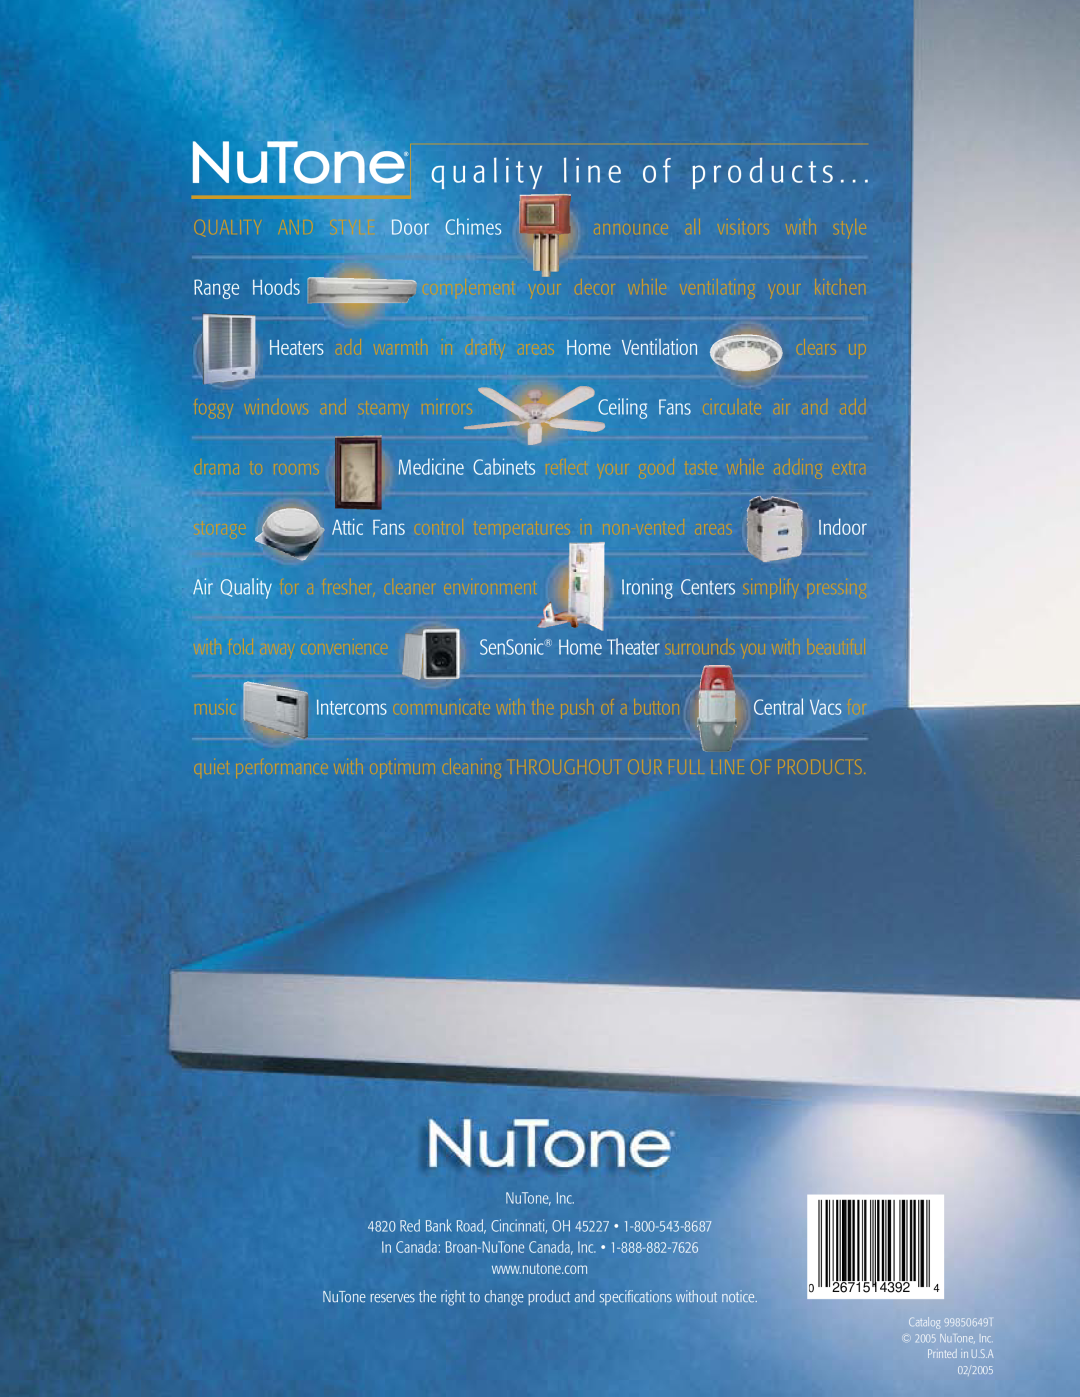 NuTone kitchen ventilation q u a l i t y l i n e o f p r o d u c t s, Door Chimes, announce all visitors with style, foggy 